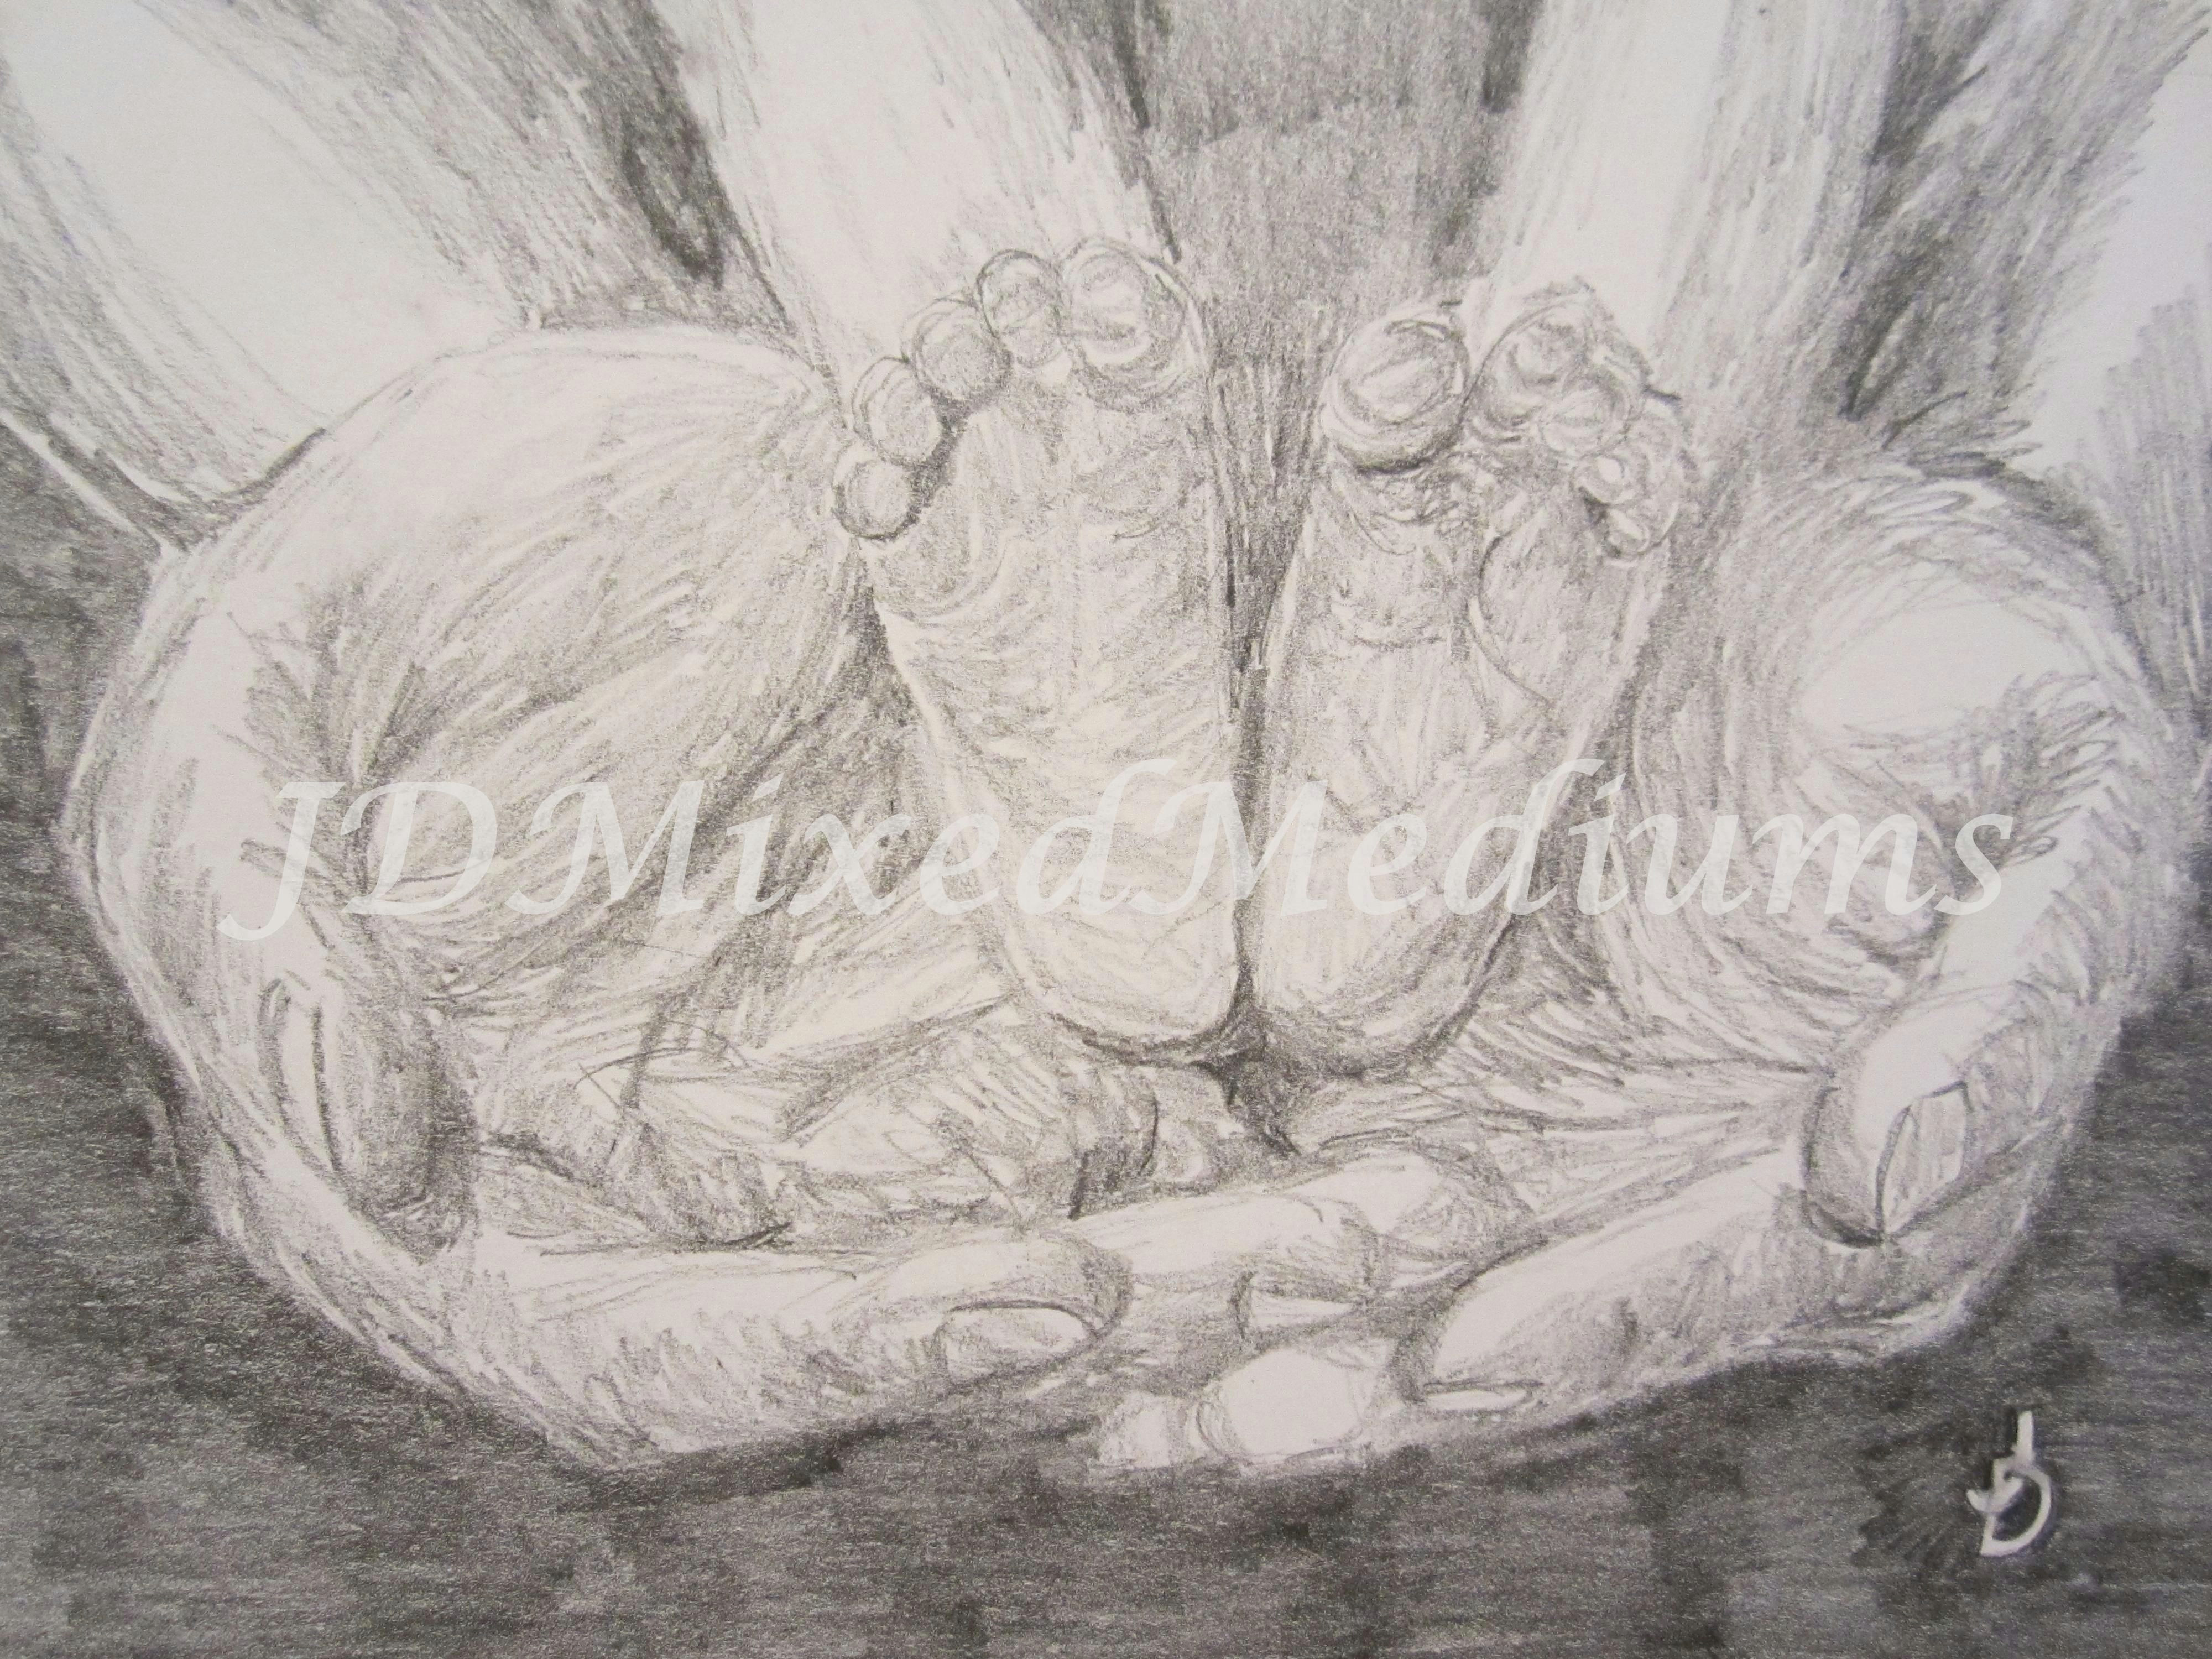 Graphite Drawings Of Hands In His Hands A Drawing for My Beautiful Niece Done with Graphite